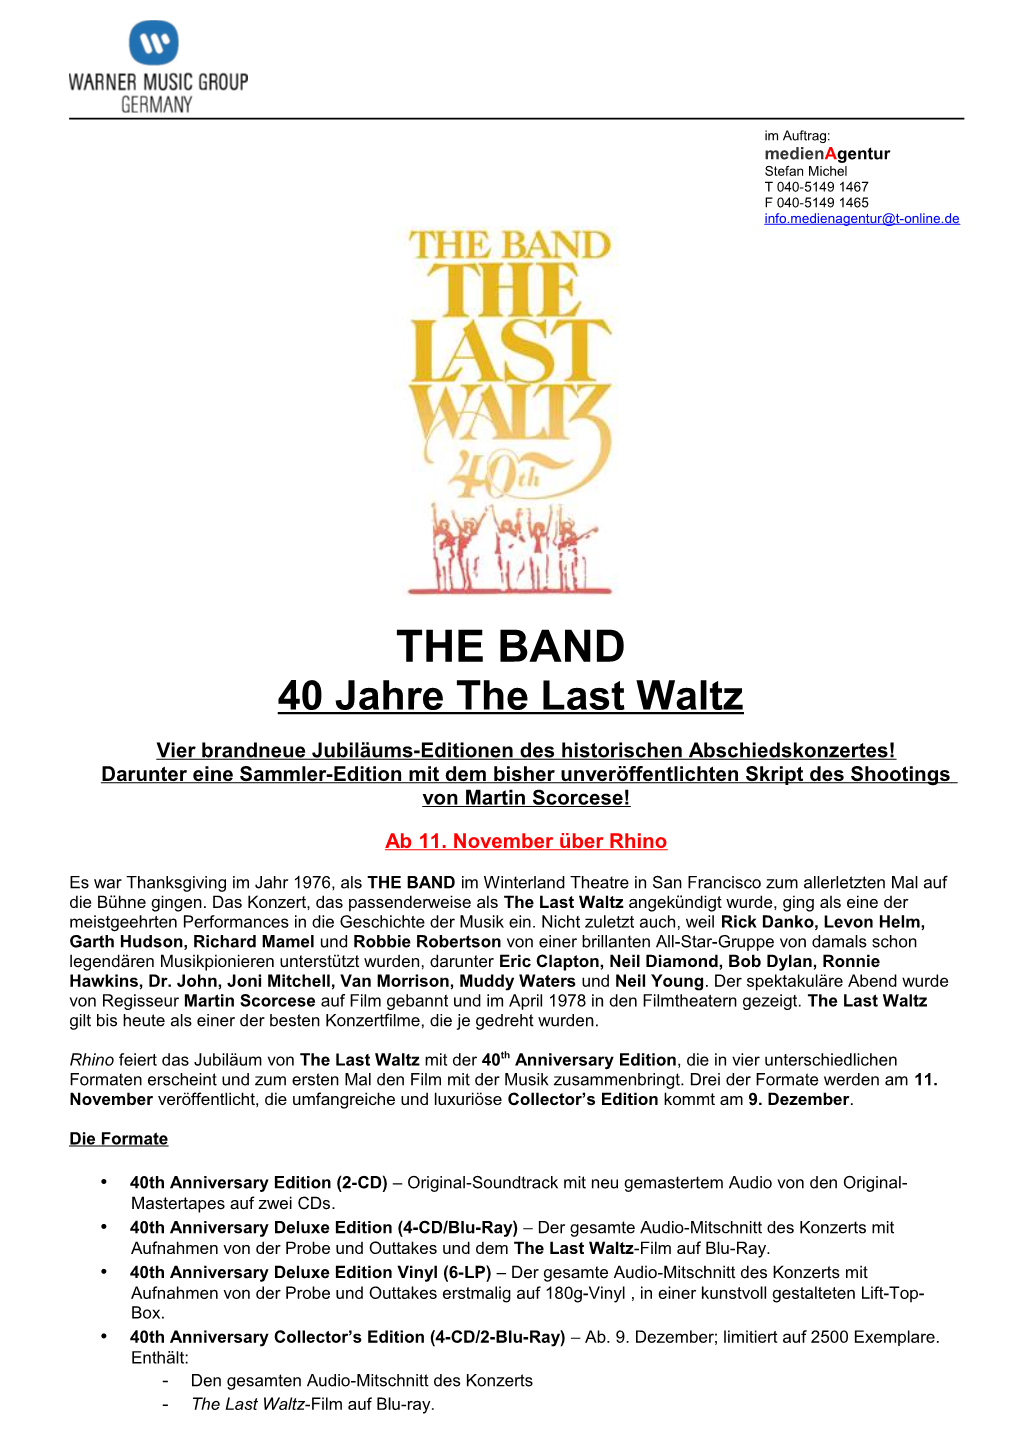 THE BAND 40 Jahre the Last Waltz